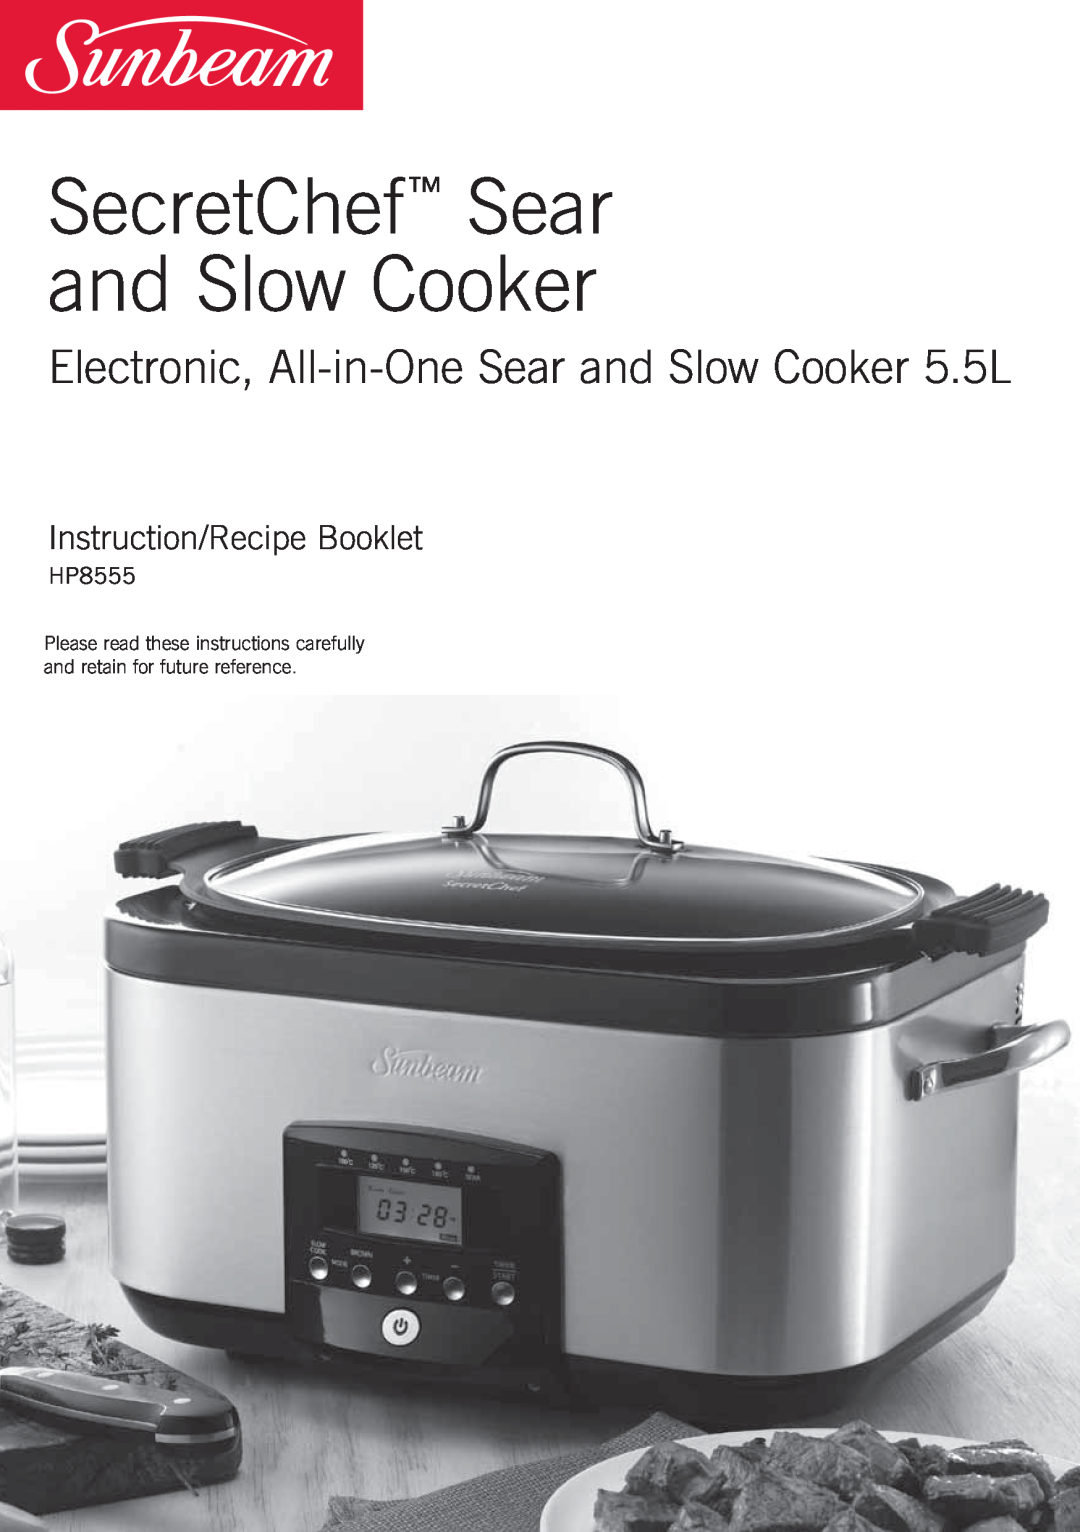 Sunbeam HP8555 manual SecretChef Sear and Slow Cooker, Electronic, All-in-OneSear and Slow Cooker 5.5L 